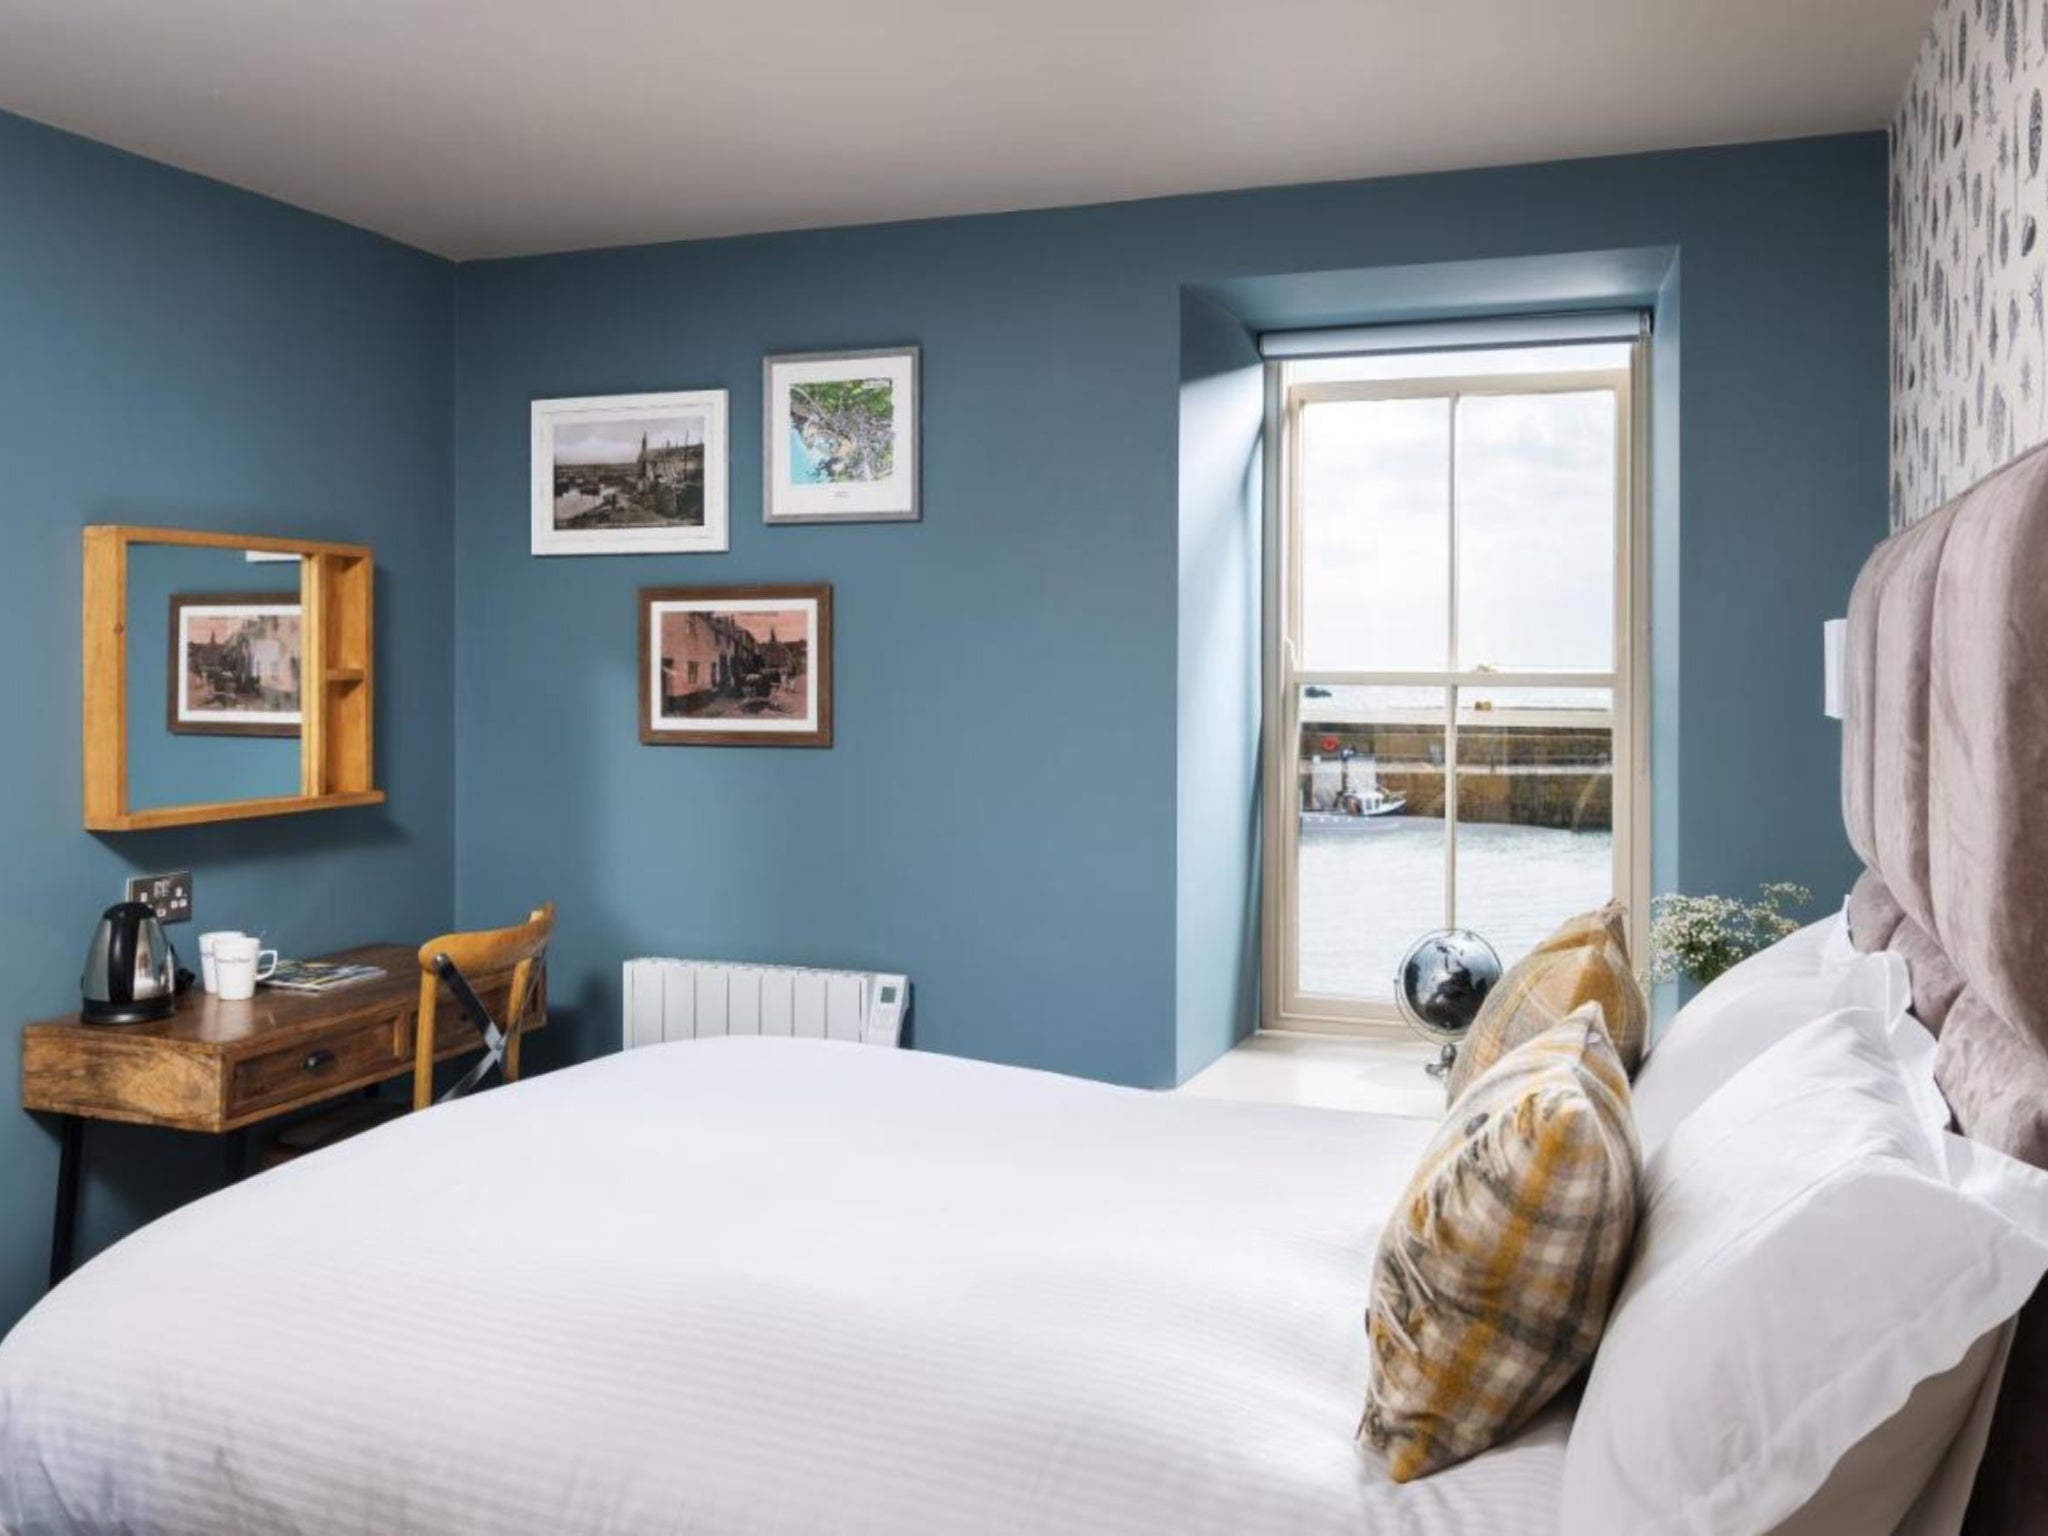 The Ship Inn offers affordable rooms in one of Cornwall’s most popular villages